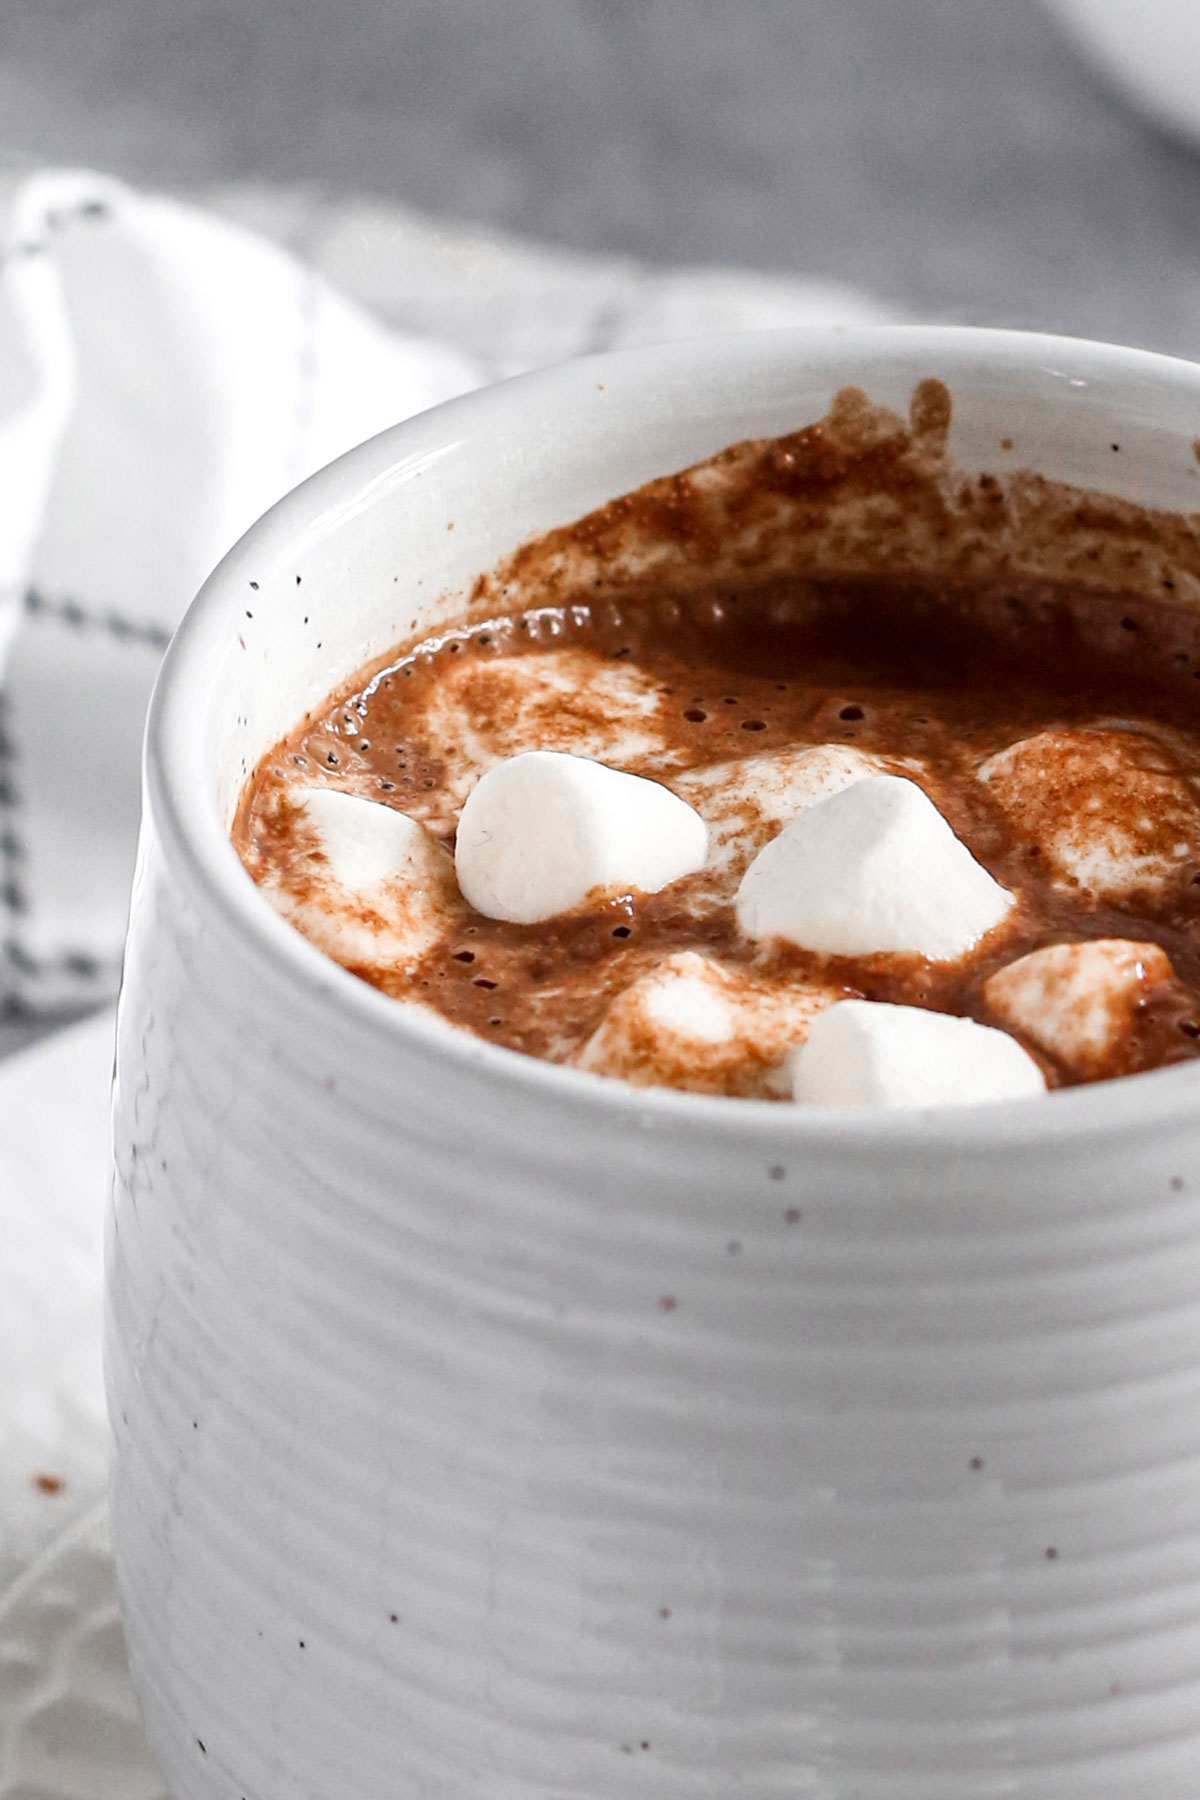 a close-up image of the mug containing hot cocoa and marshmallows.